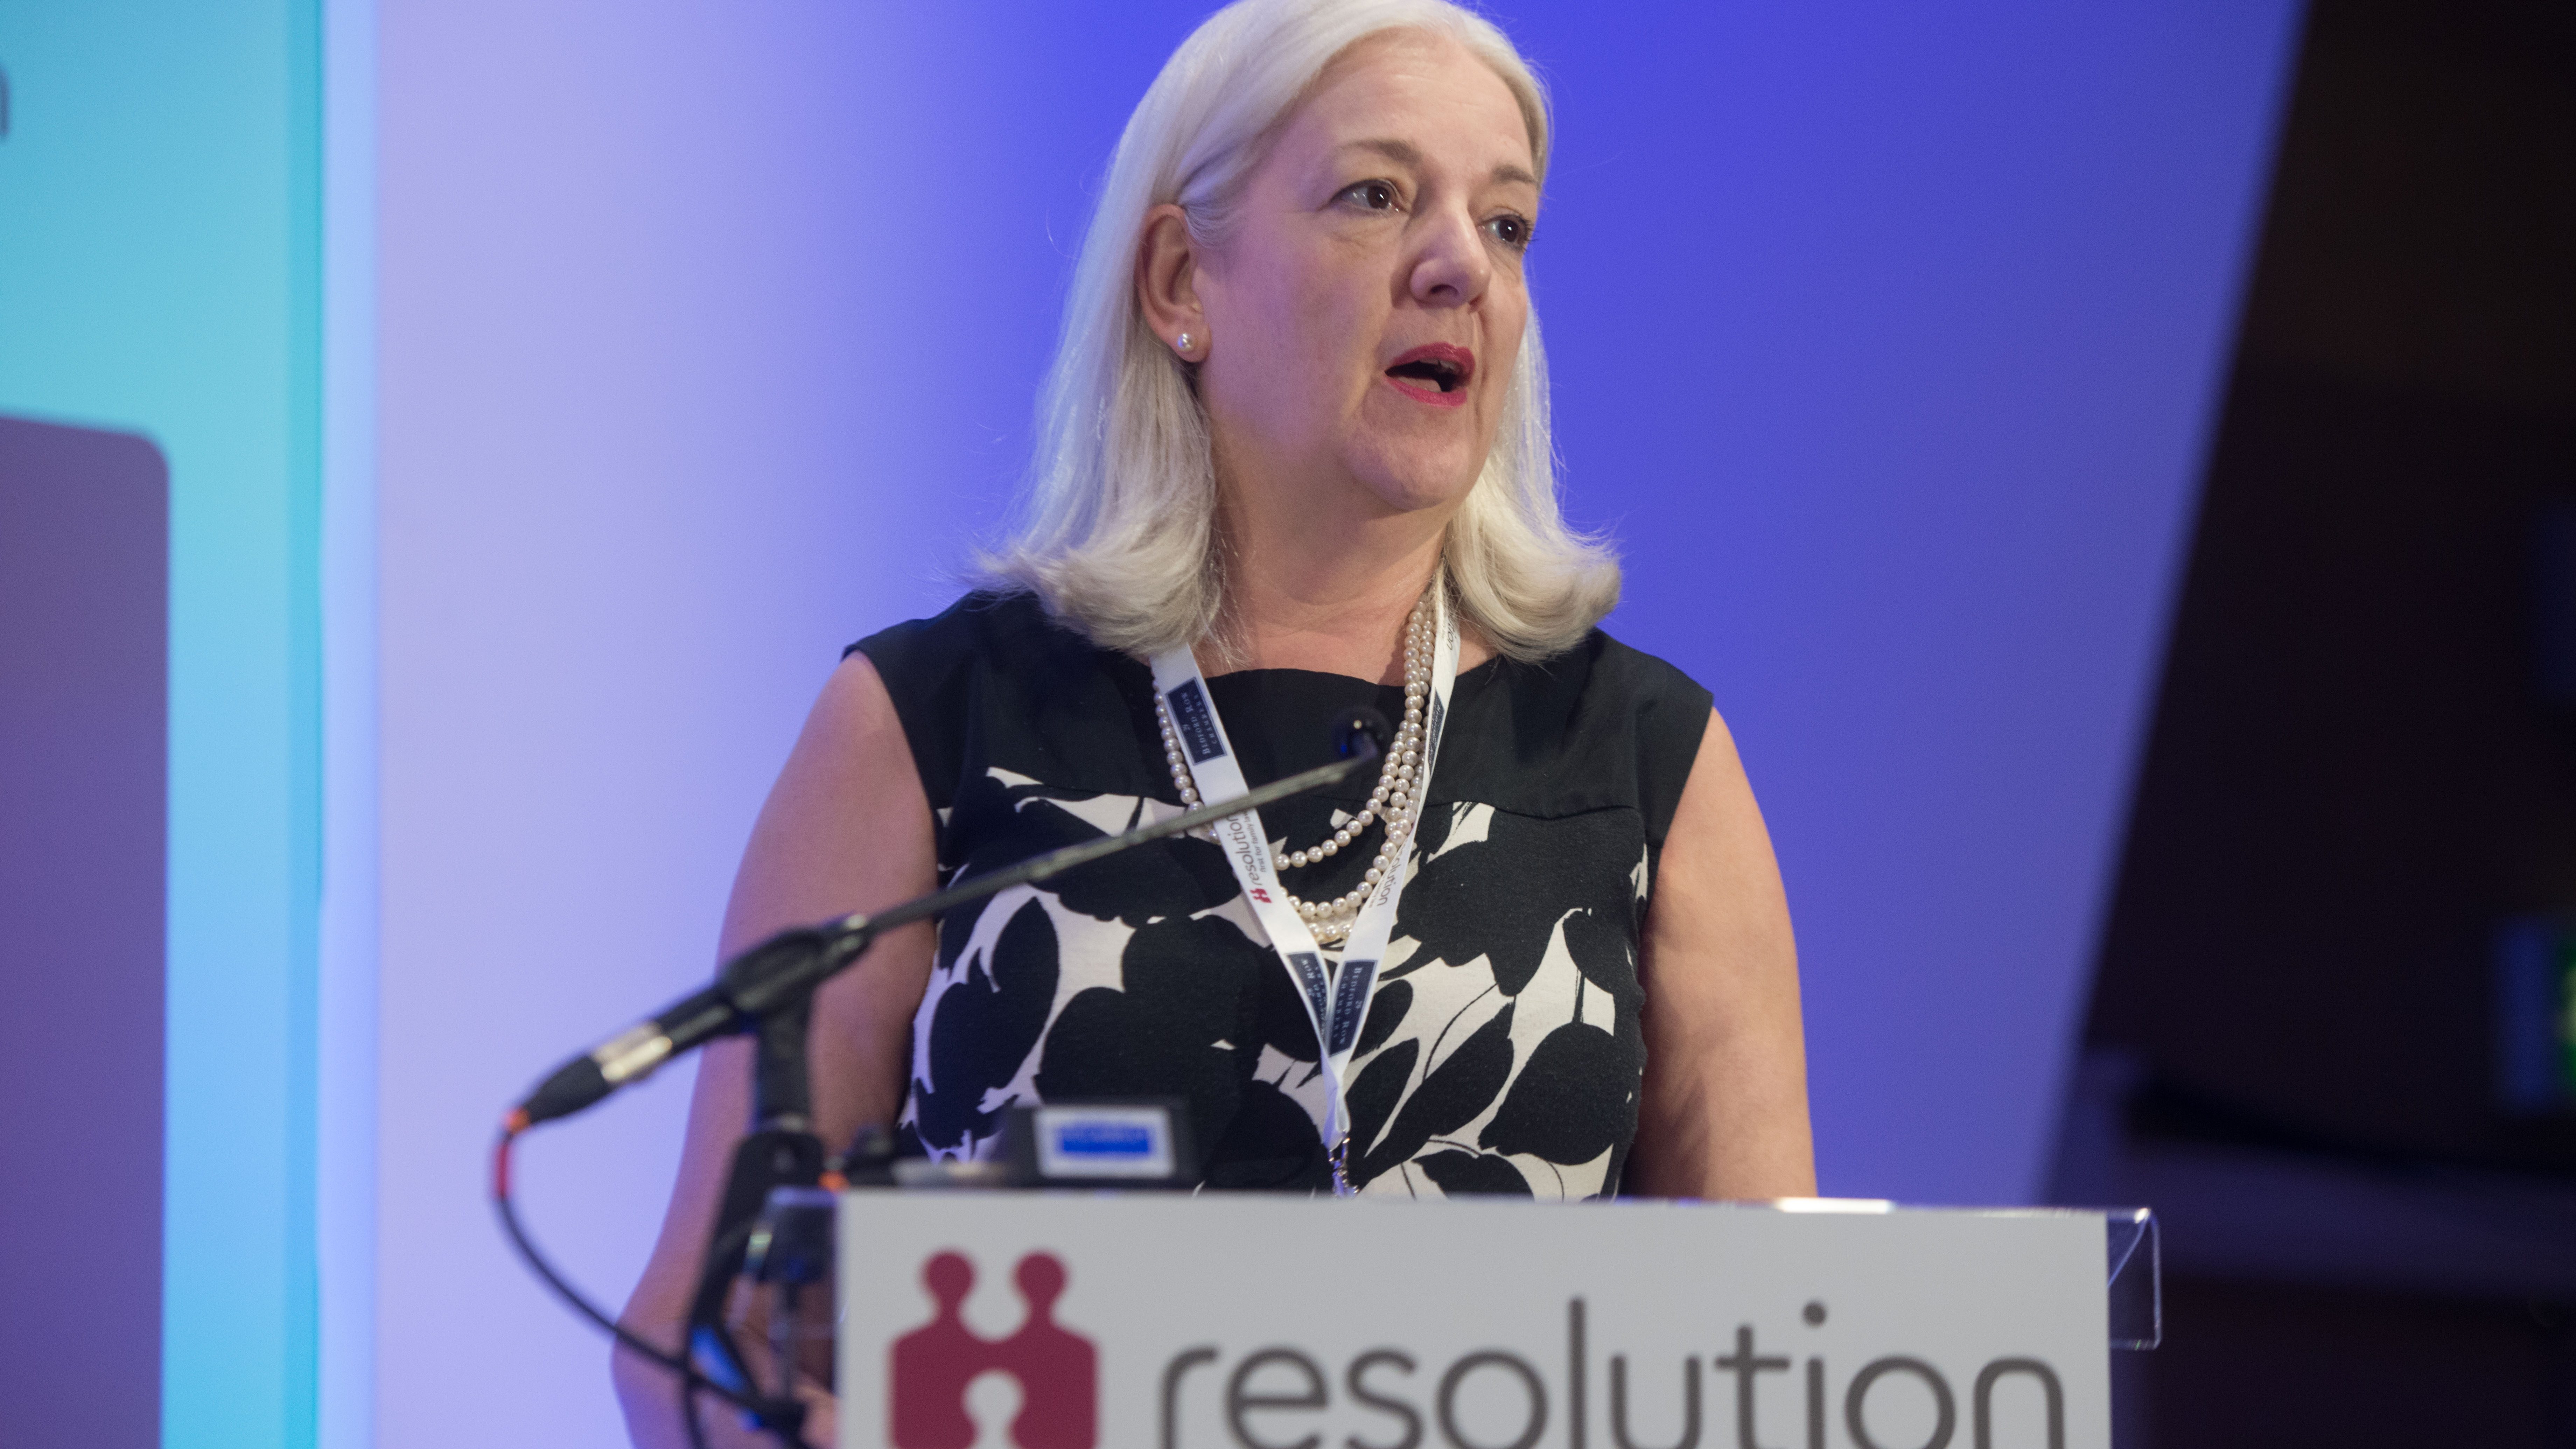 Resolution's Chair gives her speech to the 2019 National Conference